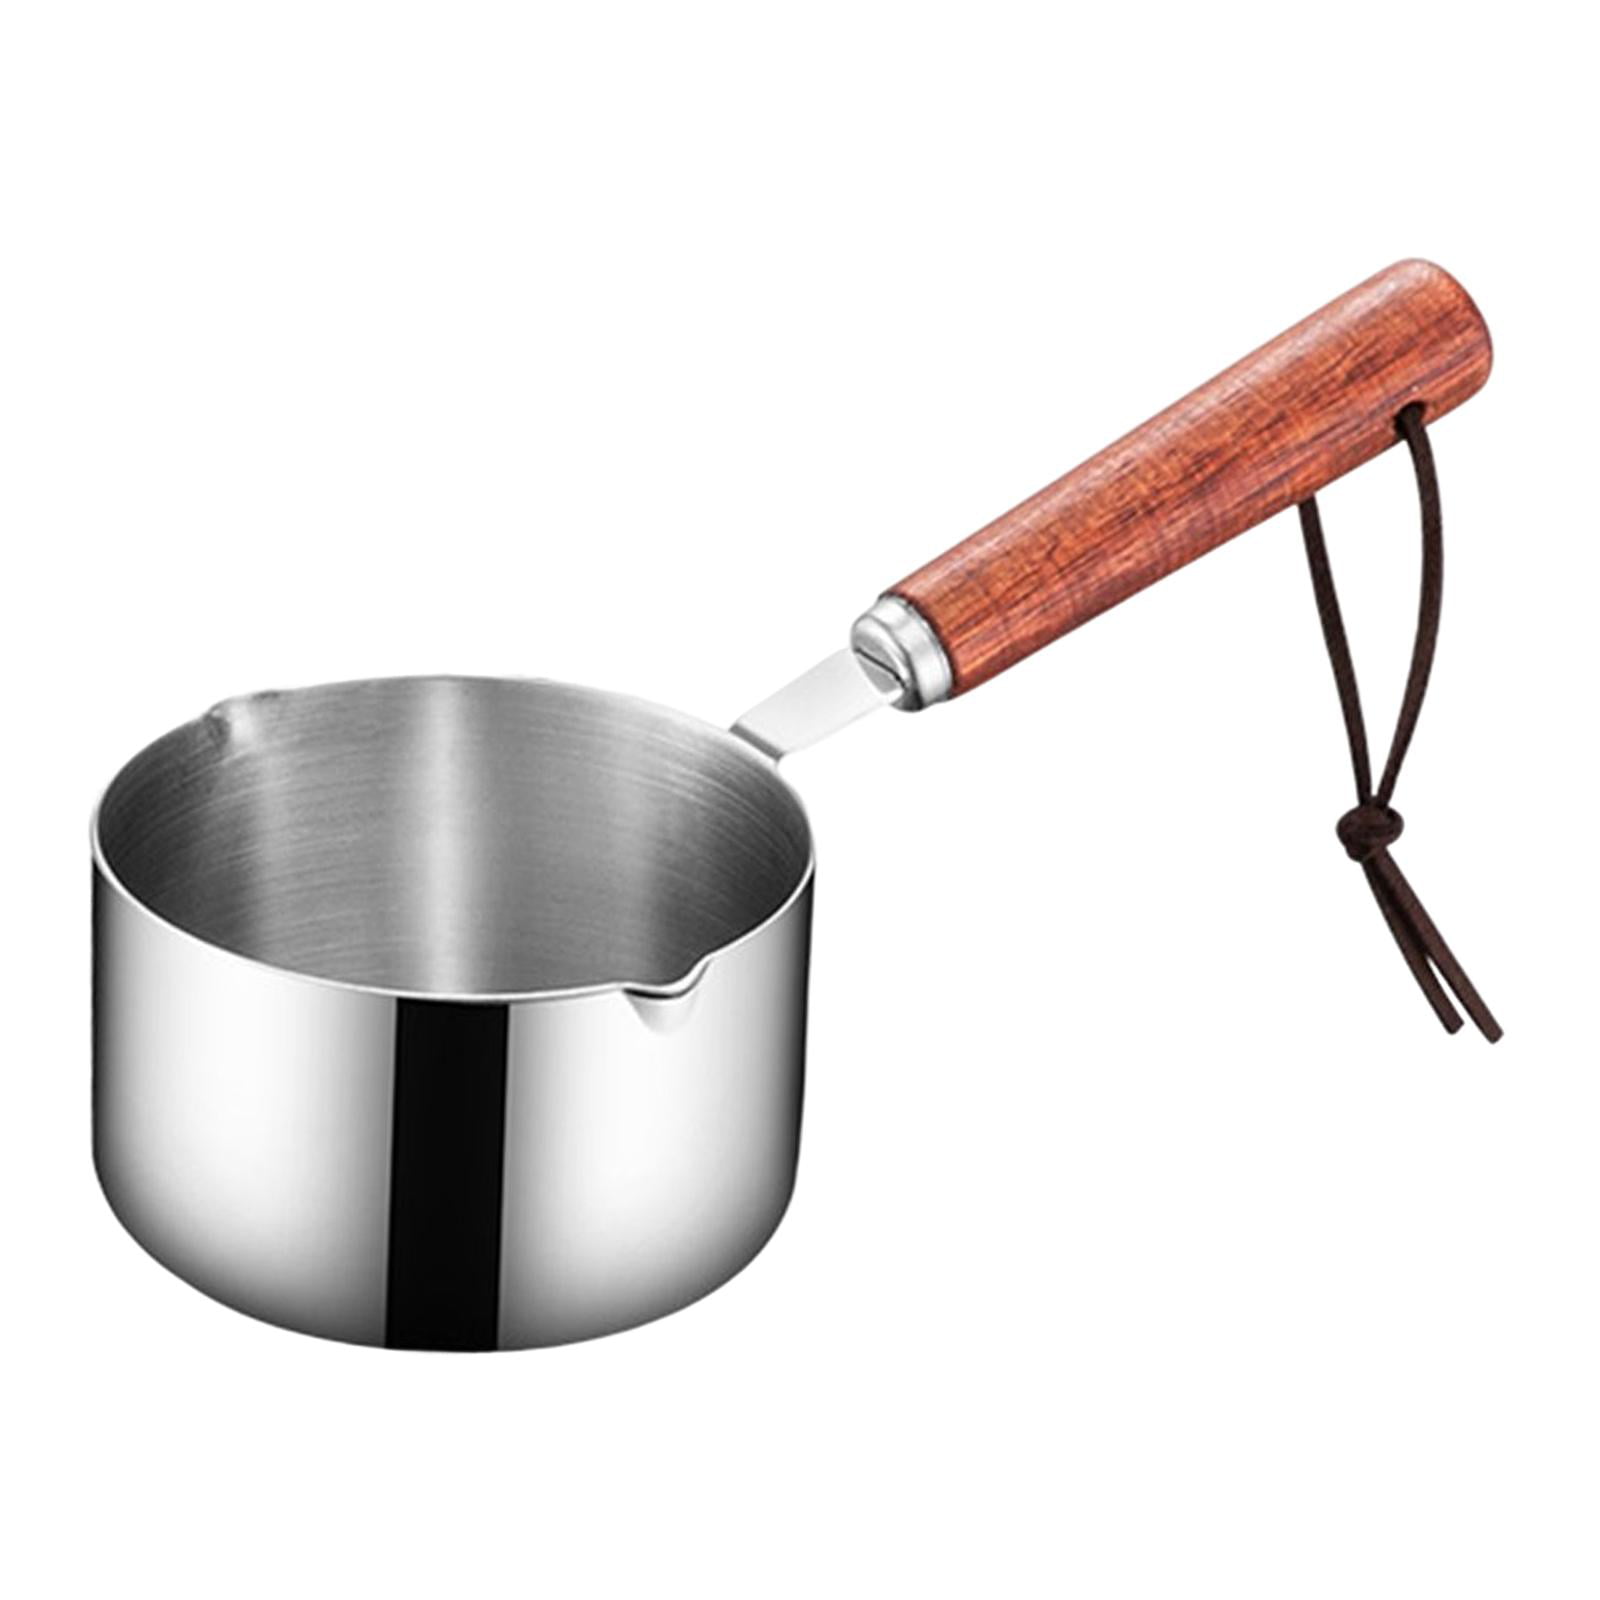 Restaurantware 7 Inch x 3.4 Inch Small Saucepan, 1 Round Small Pot For  Cooking - With Handle, Stain Resistant, Copper Stainless Steel Kitchen